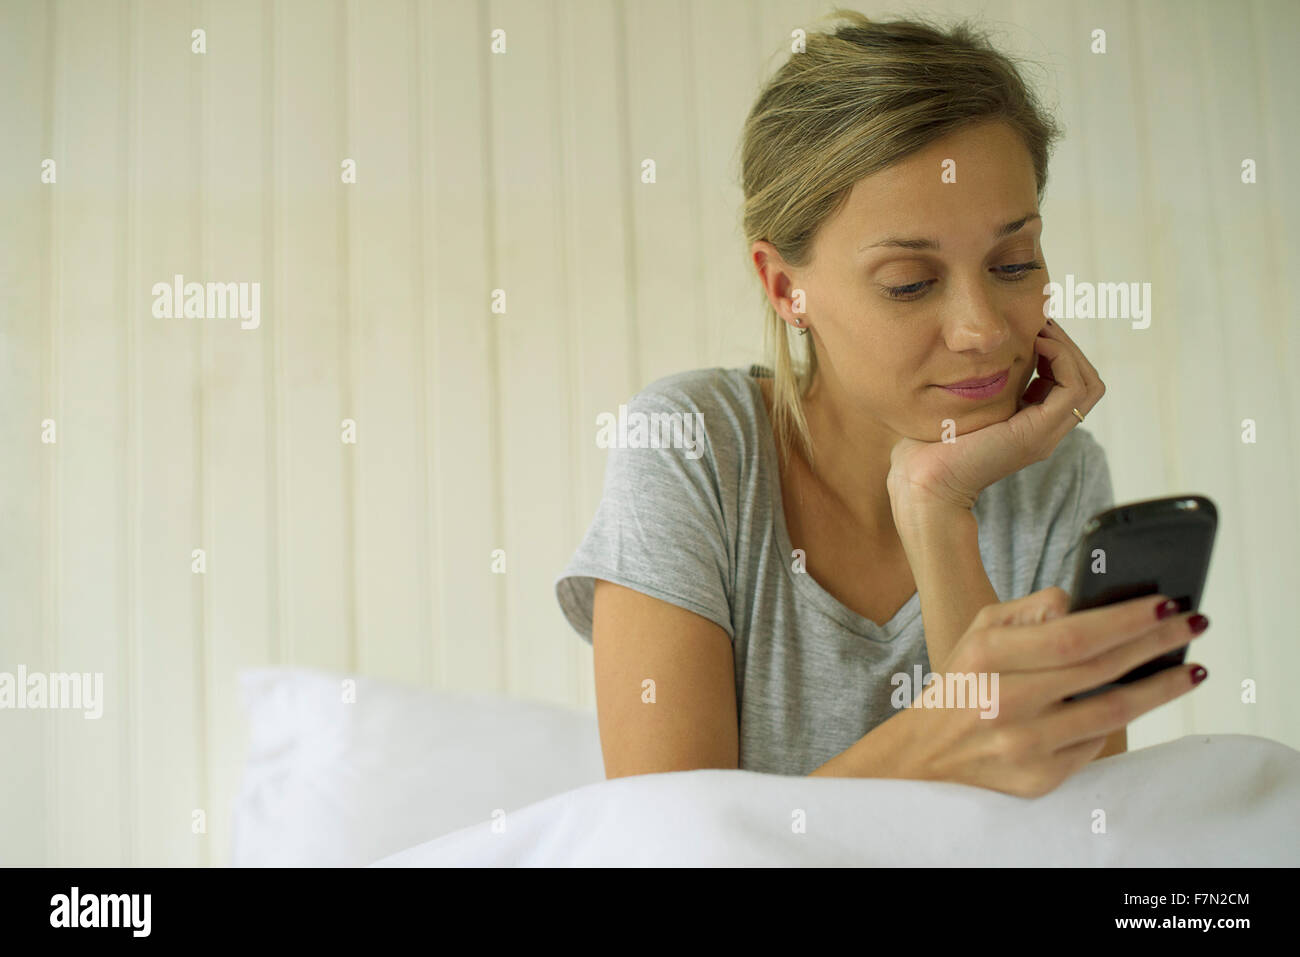 Woman sitting in bed using smartphone Banque D'Images